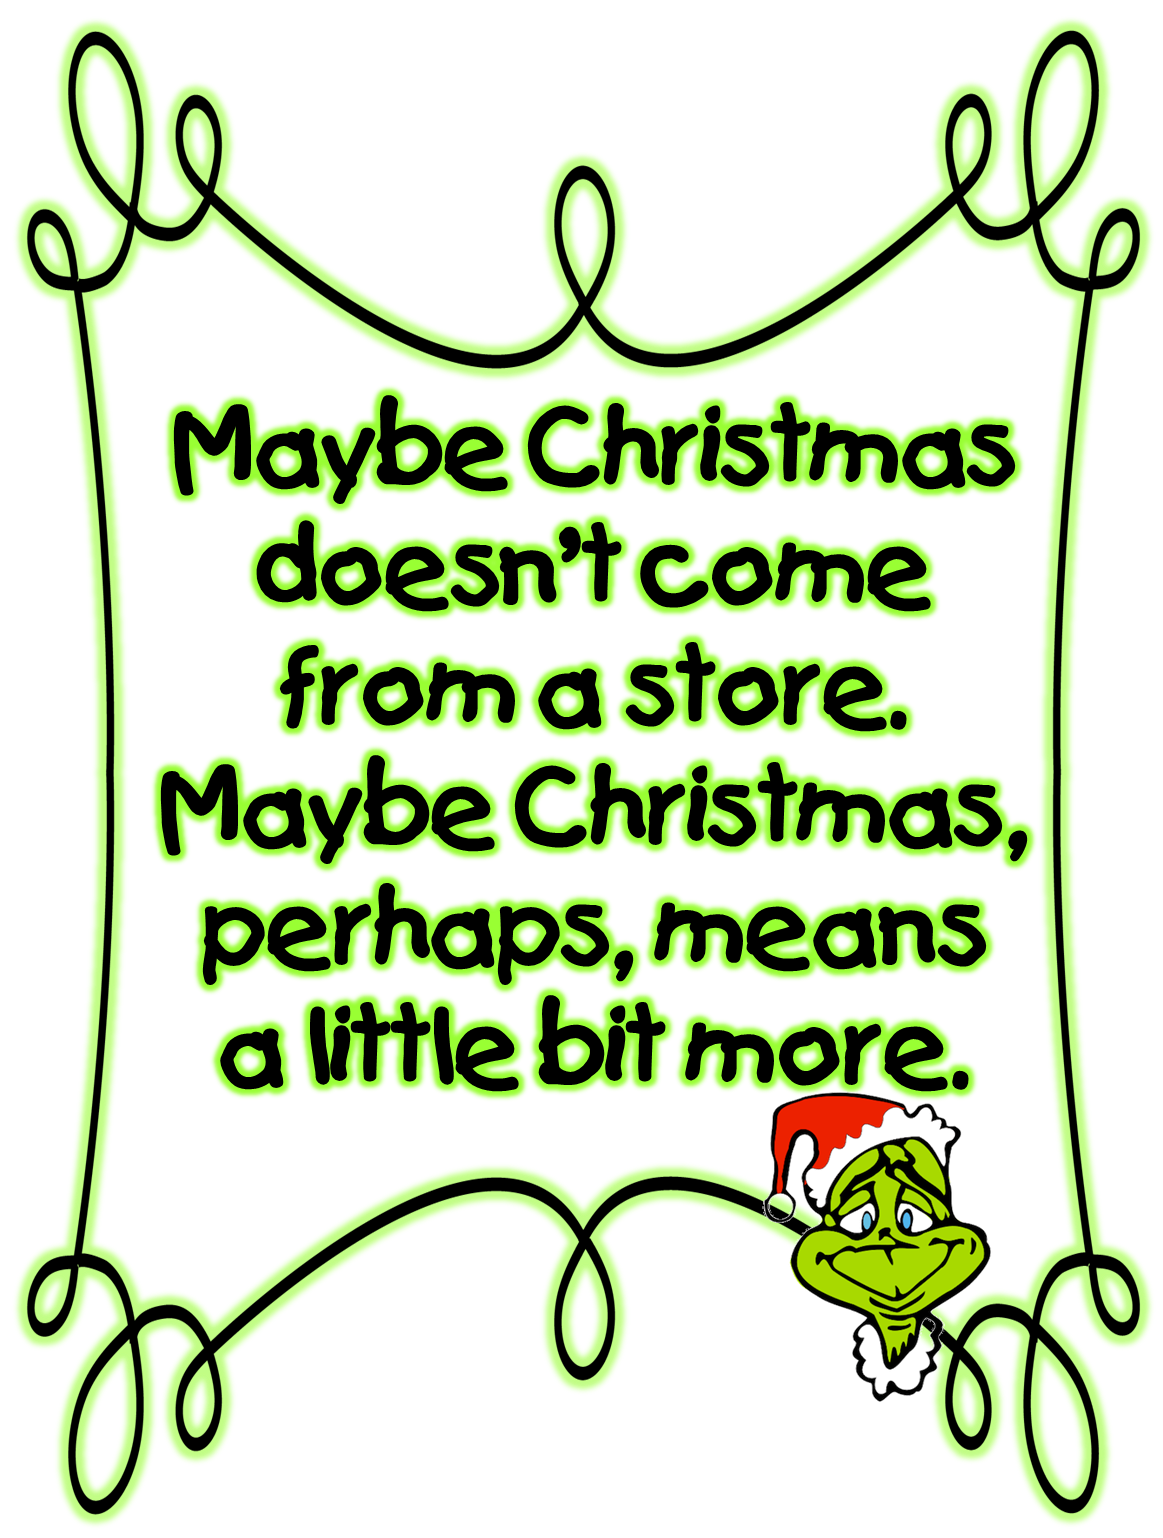  collection of free. Grinch clipart grinch max